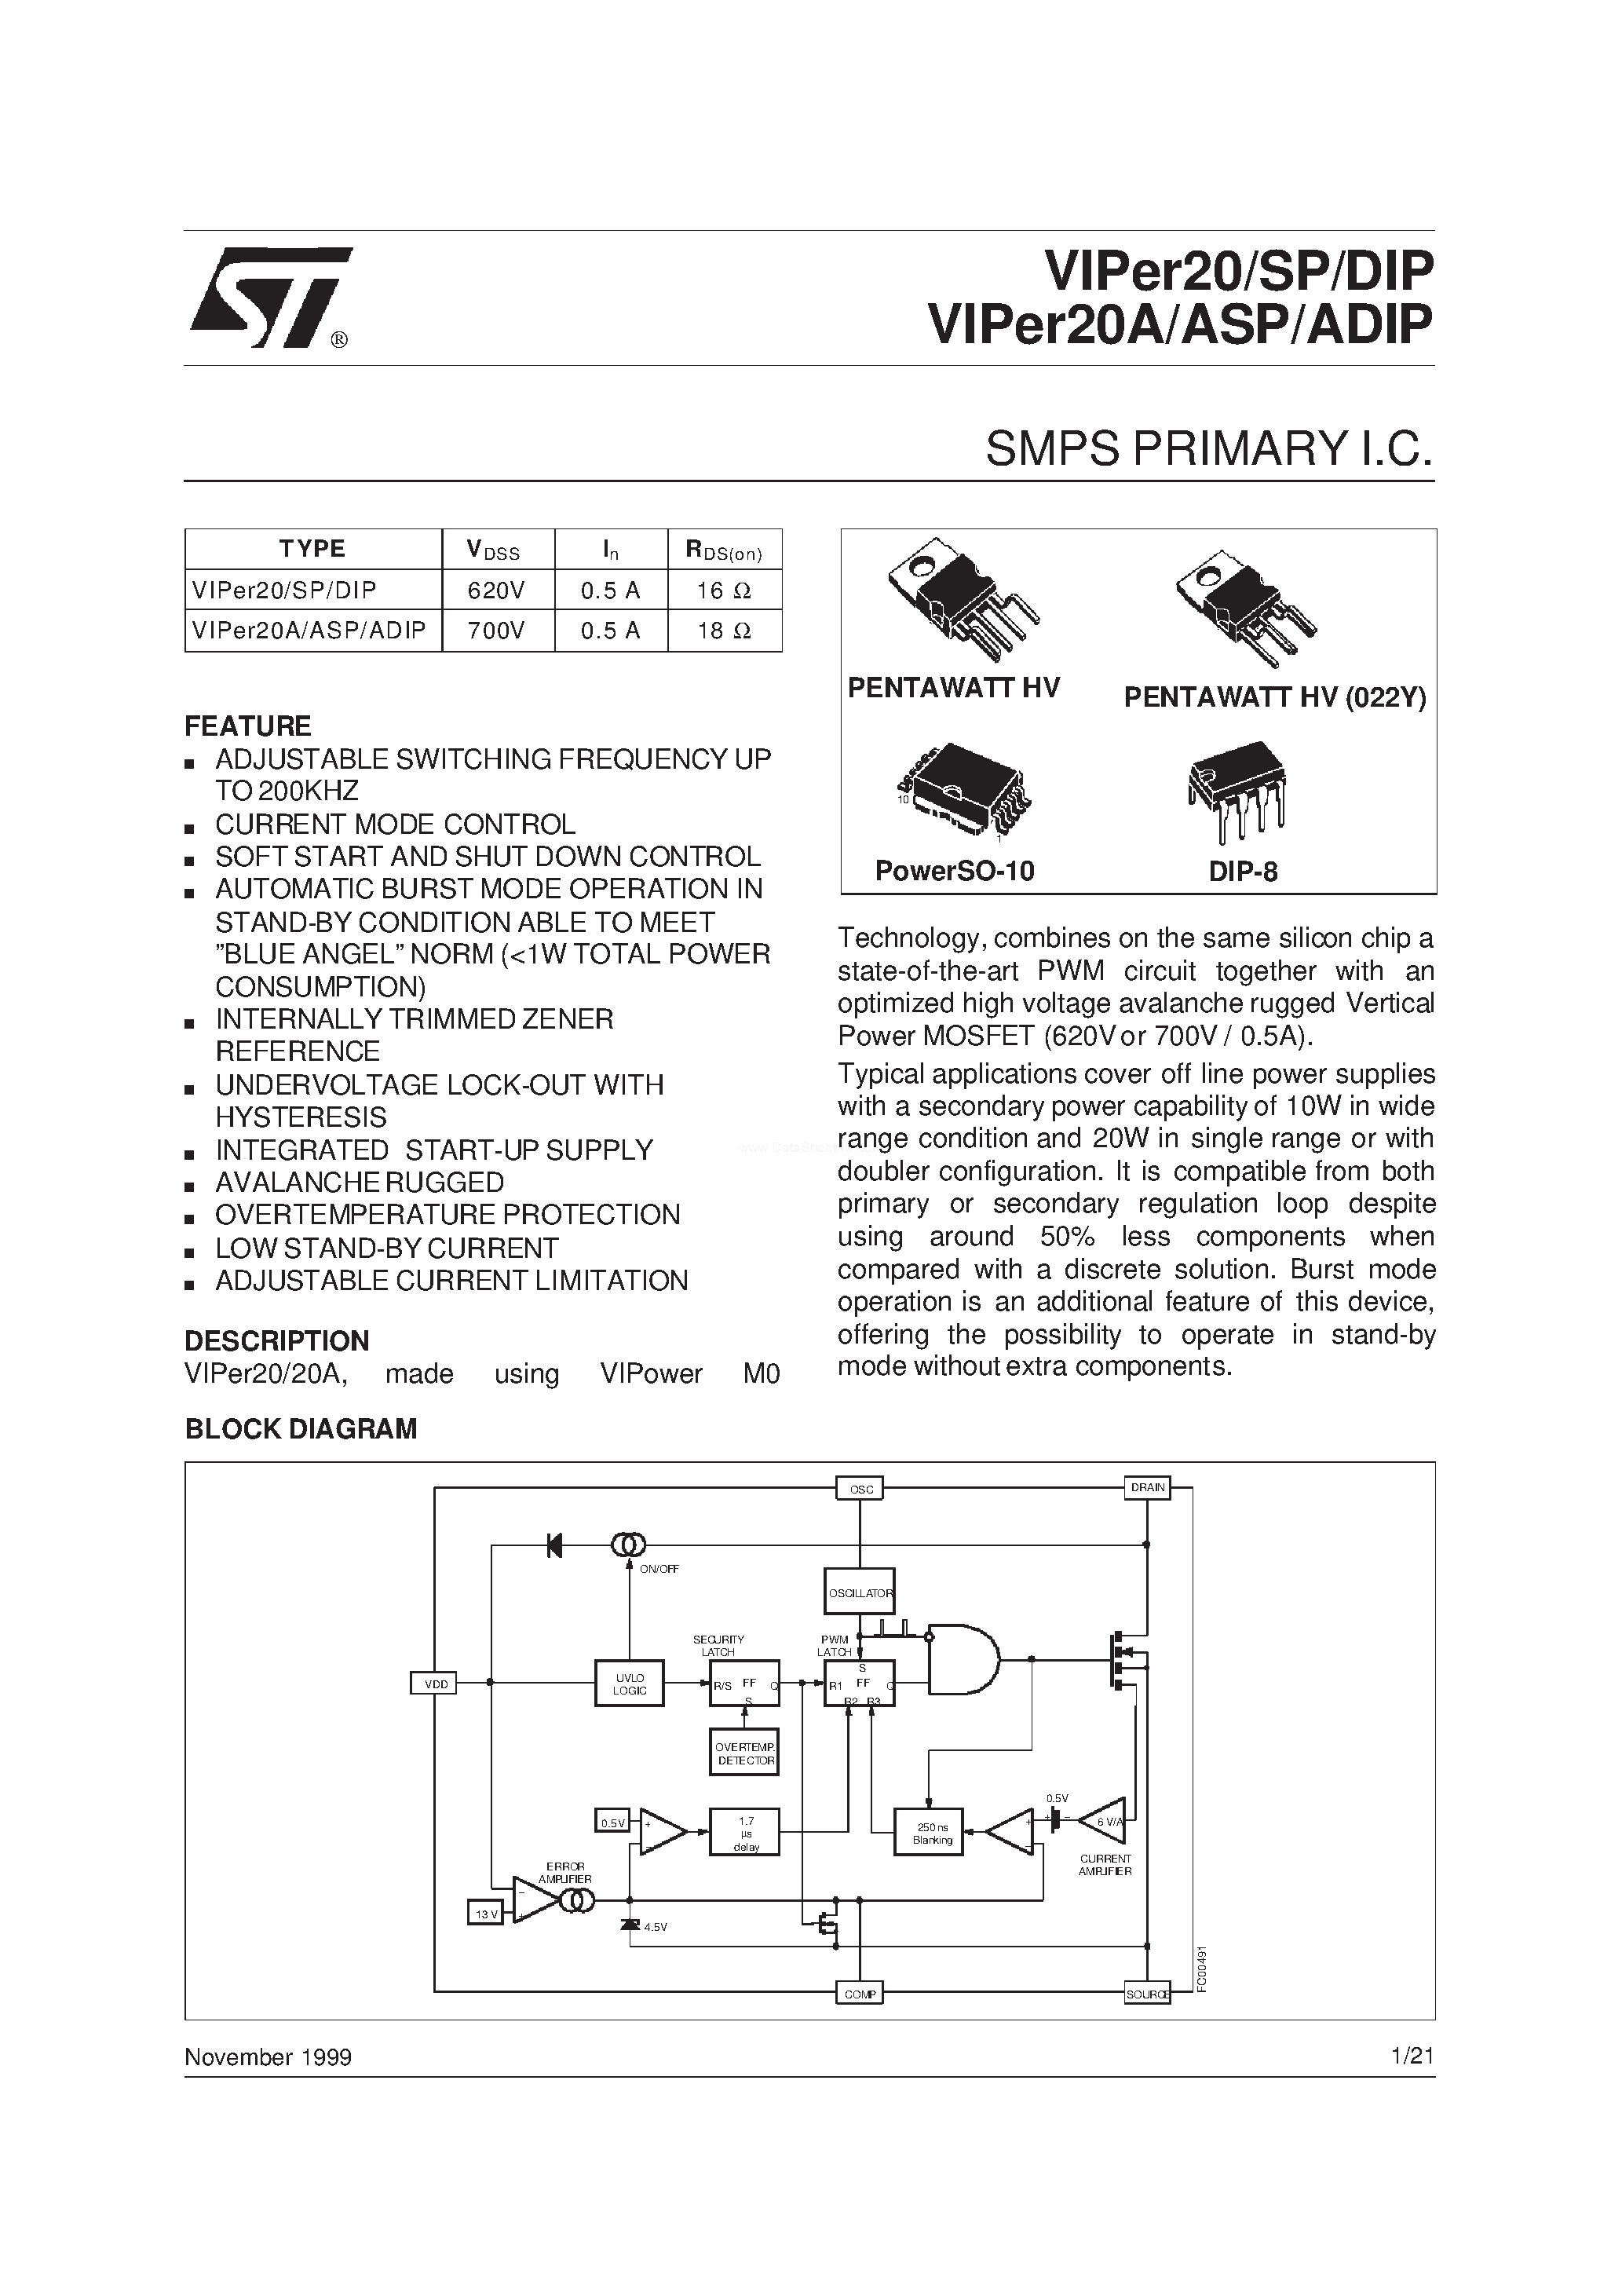 Datasheet VIPer20ADIP - SMPS PRIMARY I.C. page 1